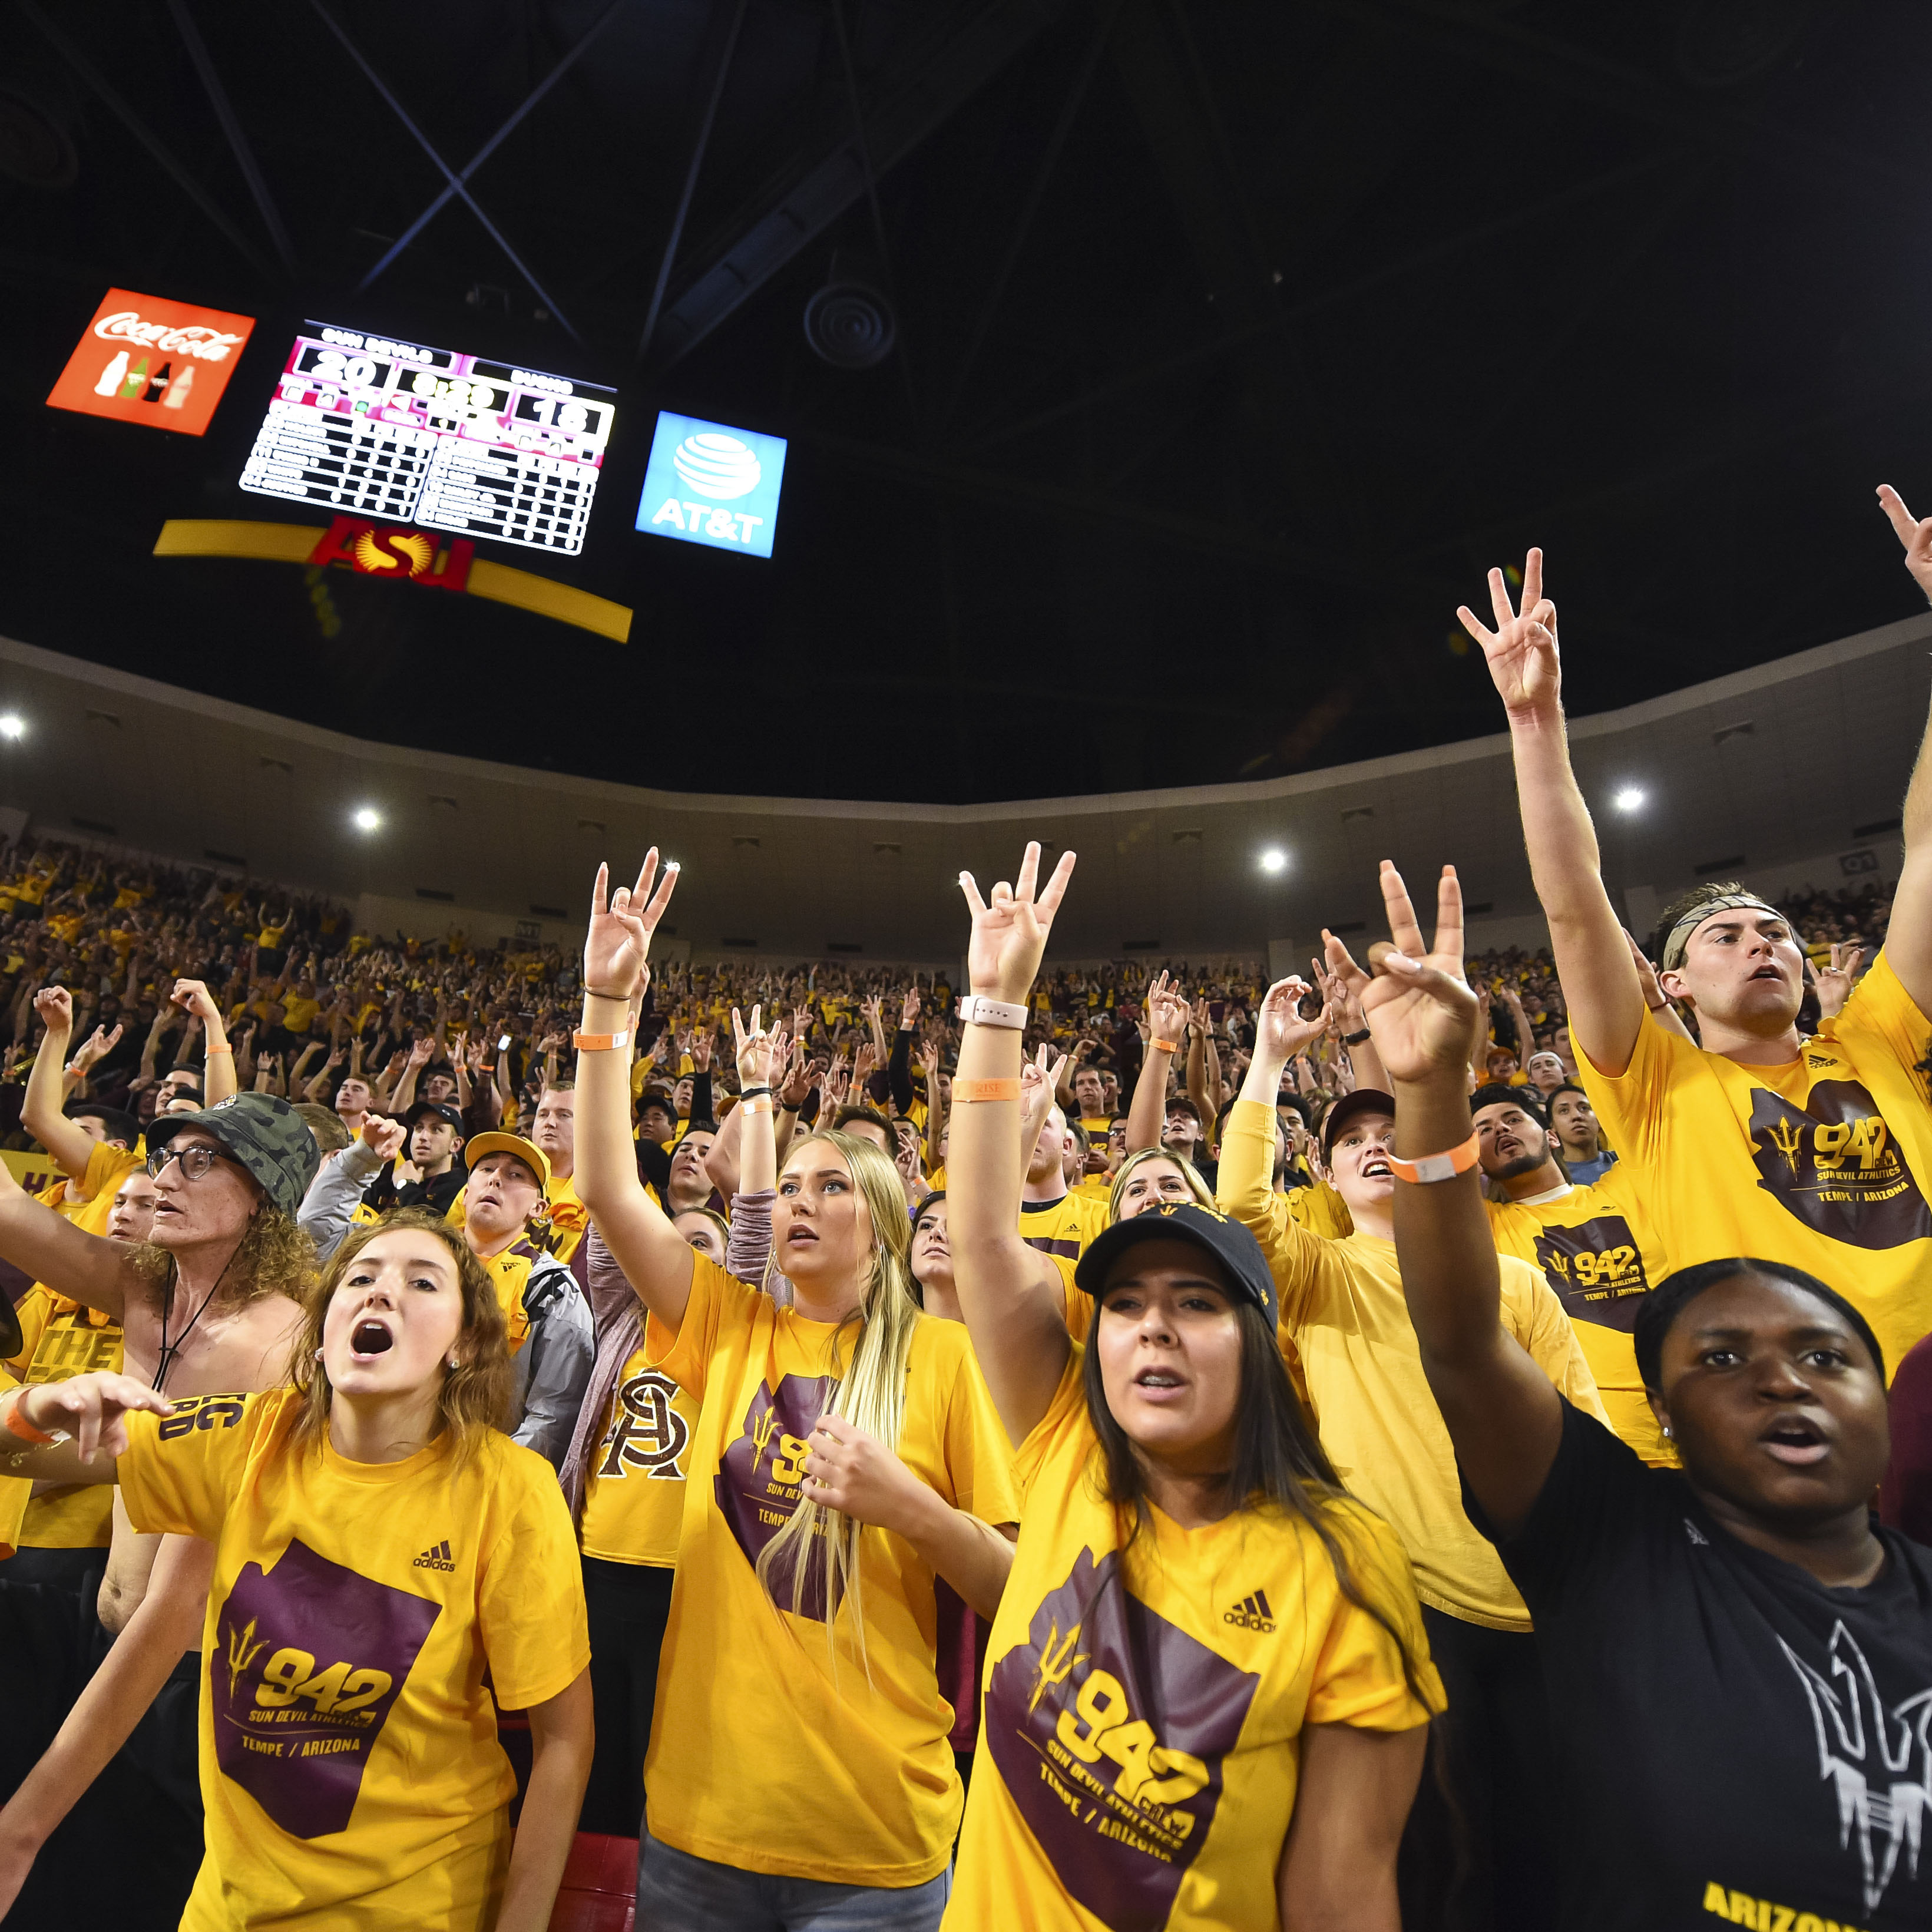 Students give the forks up sign at a basketball game at Wells Fargo Arena